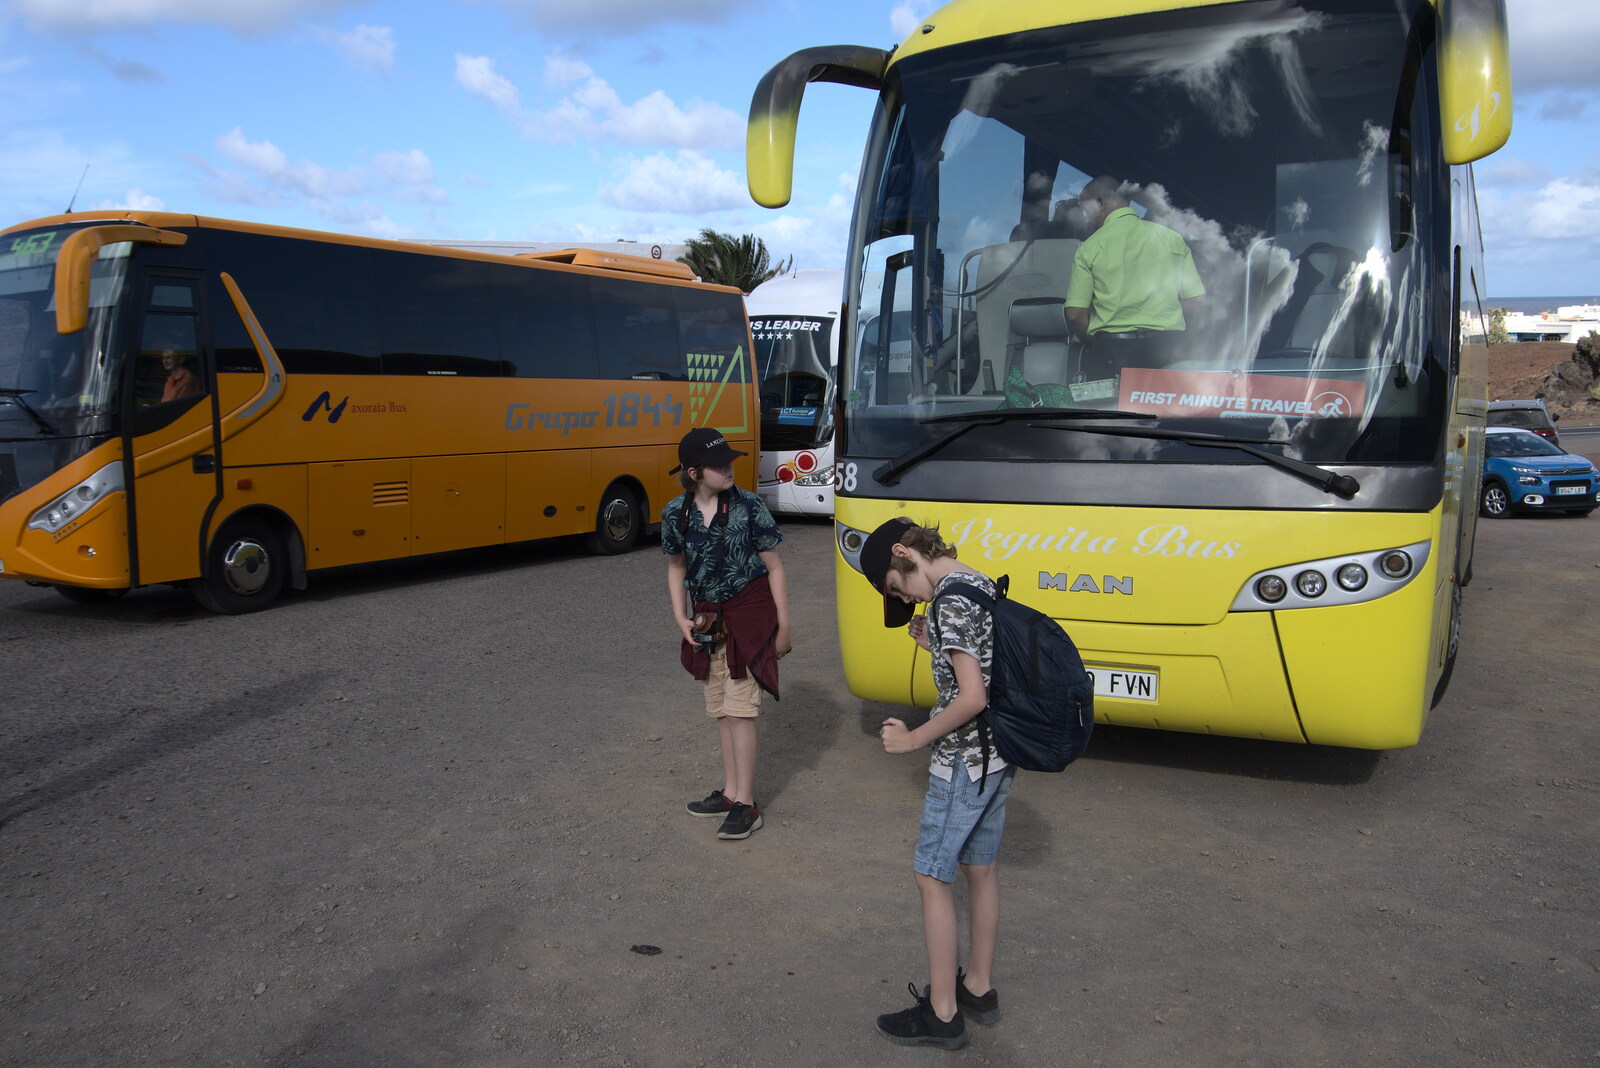 Fred and Harry by the tour bus from The Volcanoes of Lanzarote, Canary Islands, Spain - 27th October 2021